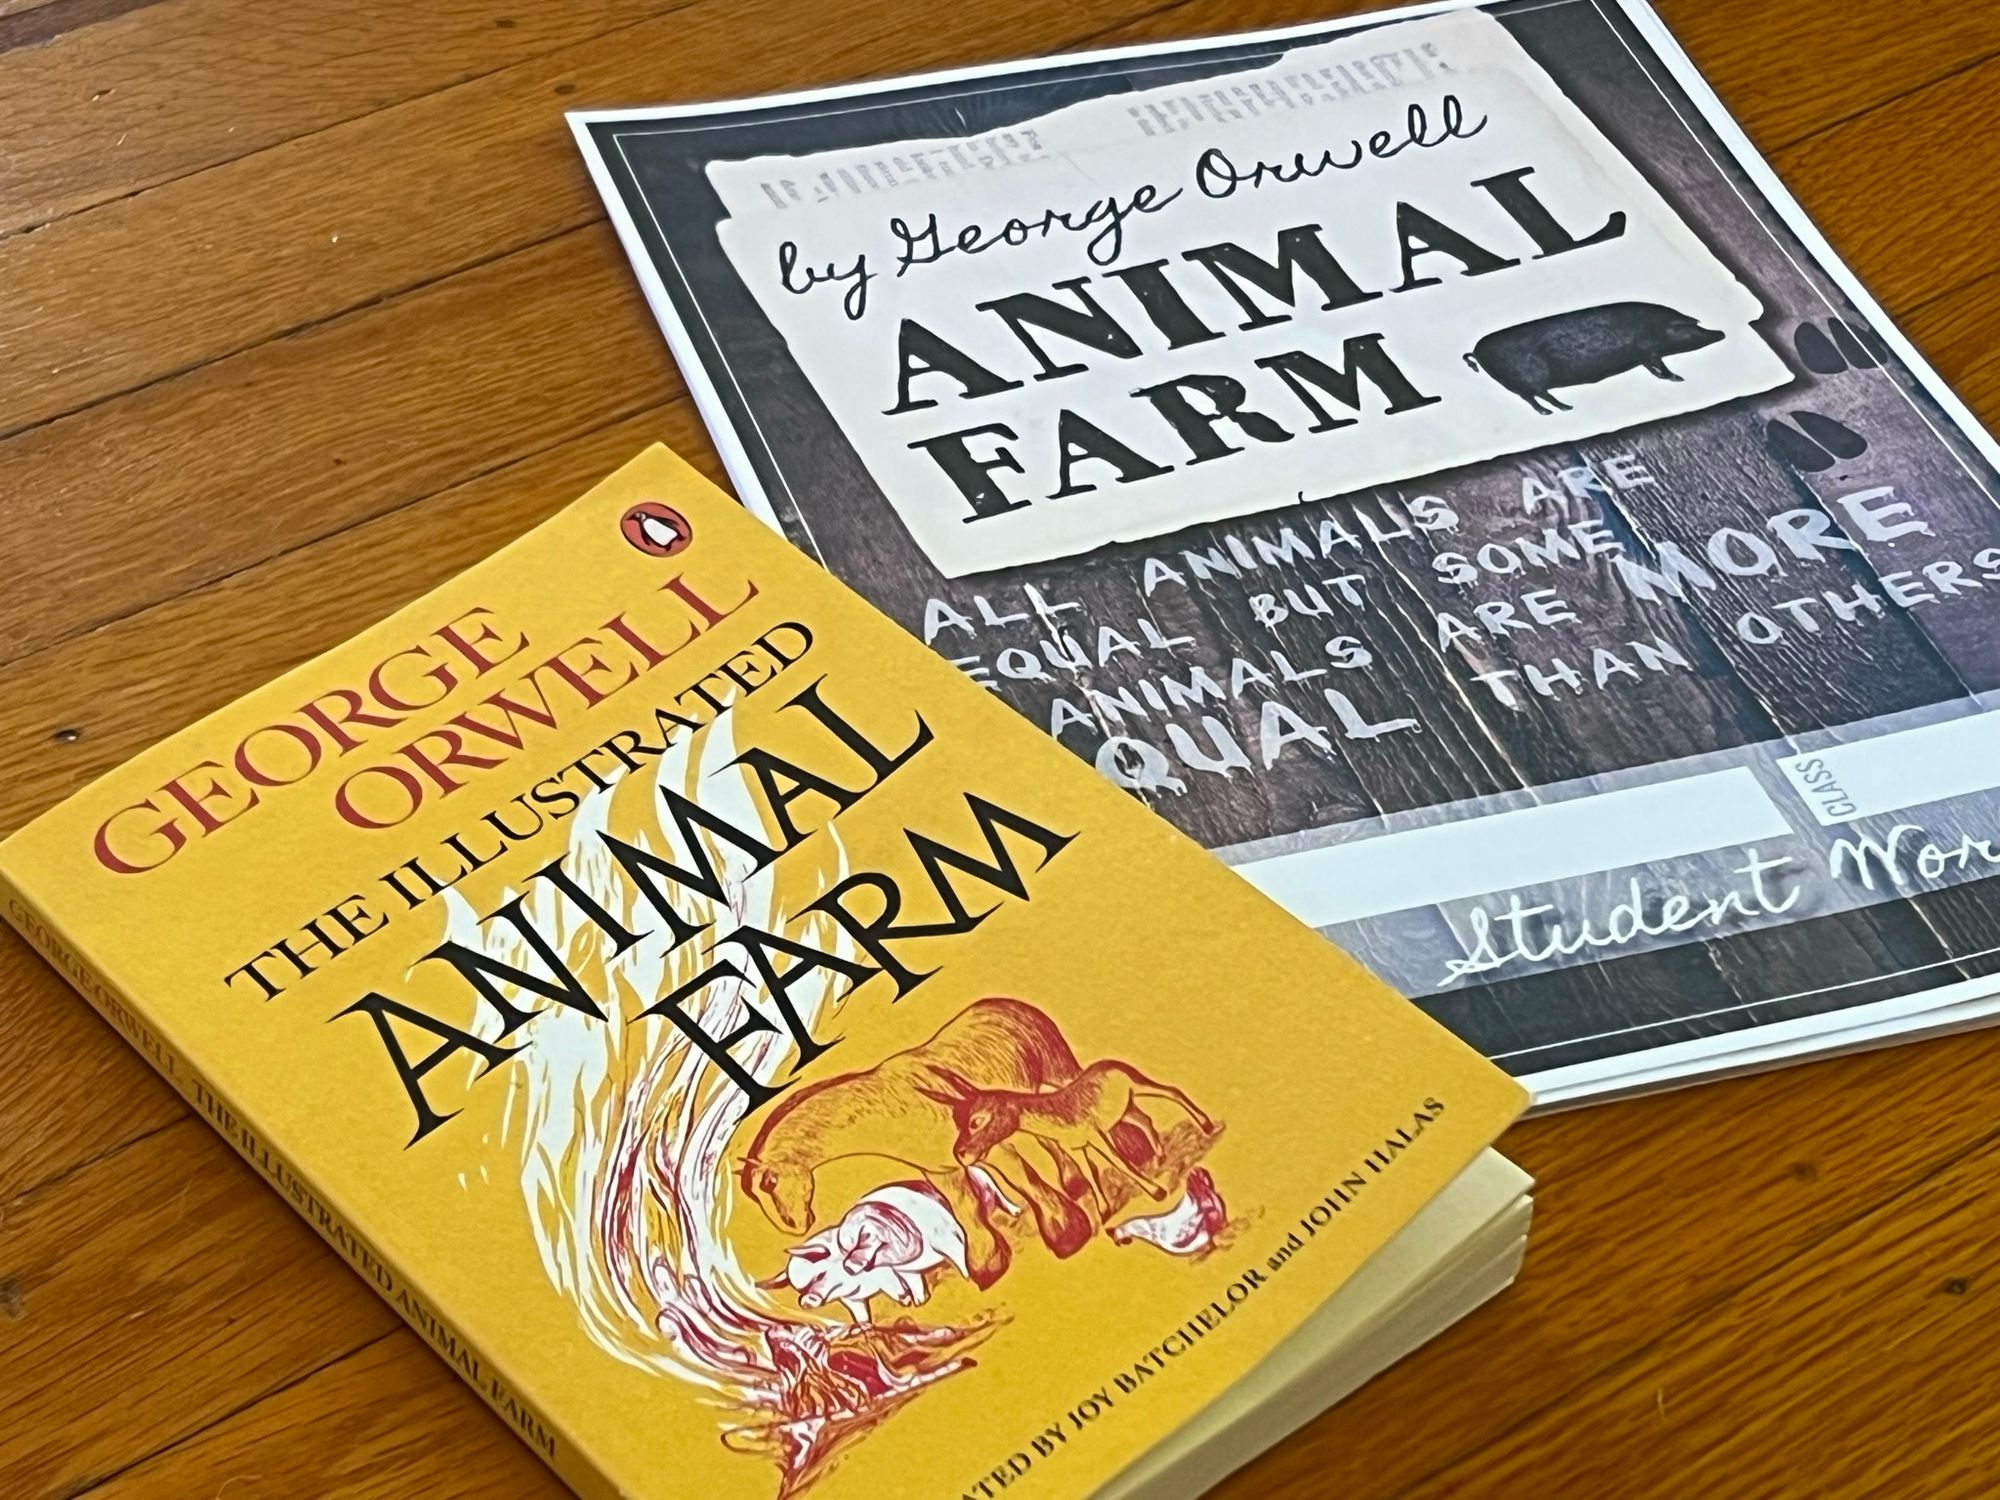 Our yellow Animal Farm paperback, and our student workbook.